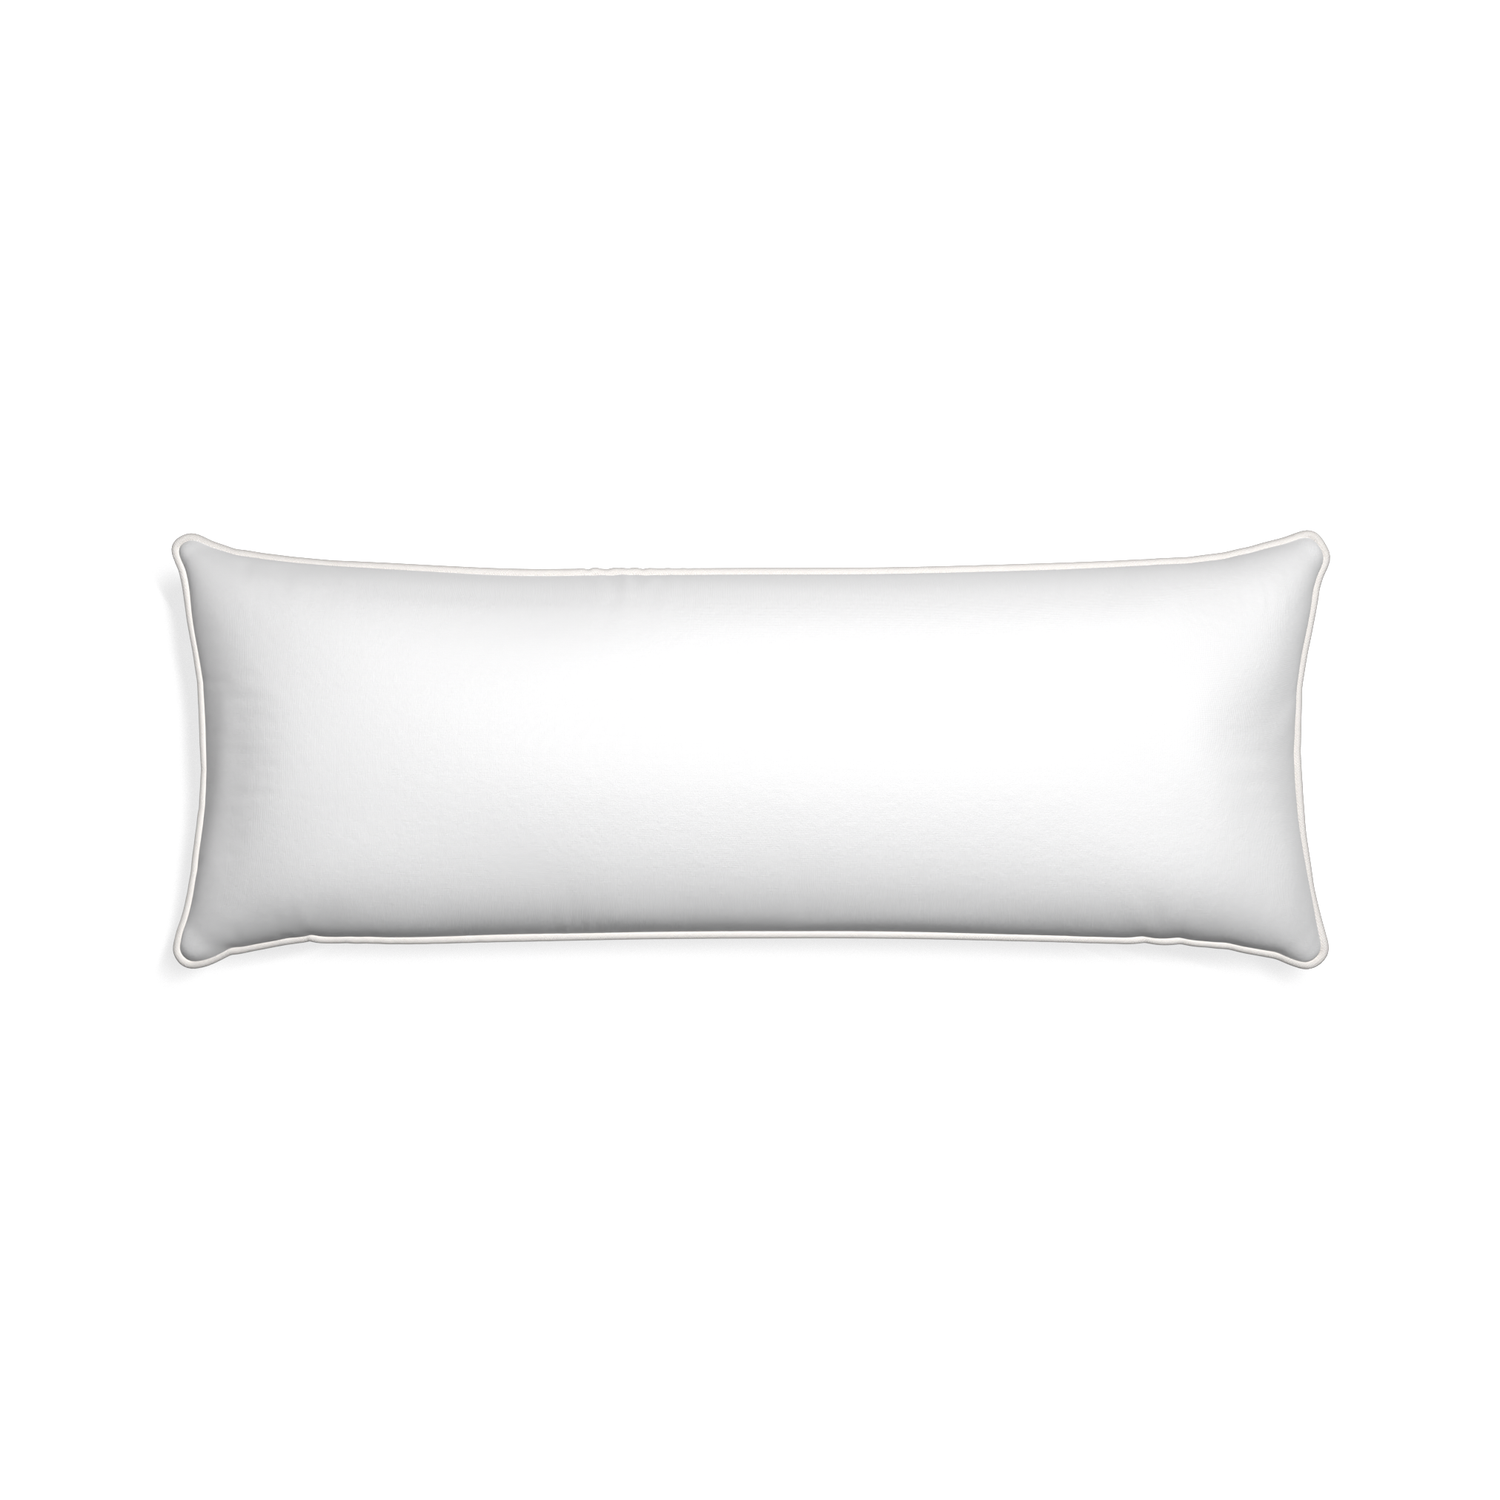 Xl-lumbar snow custom pillow with snow piping on white background